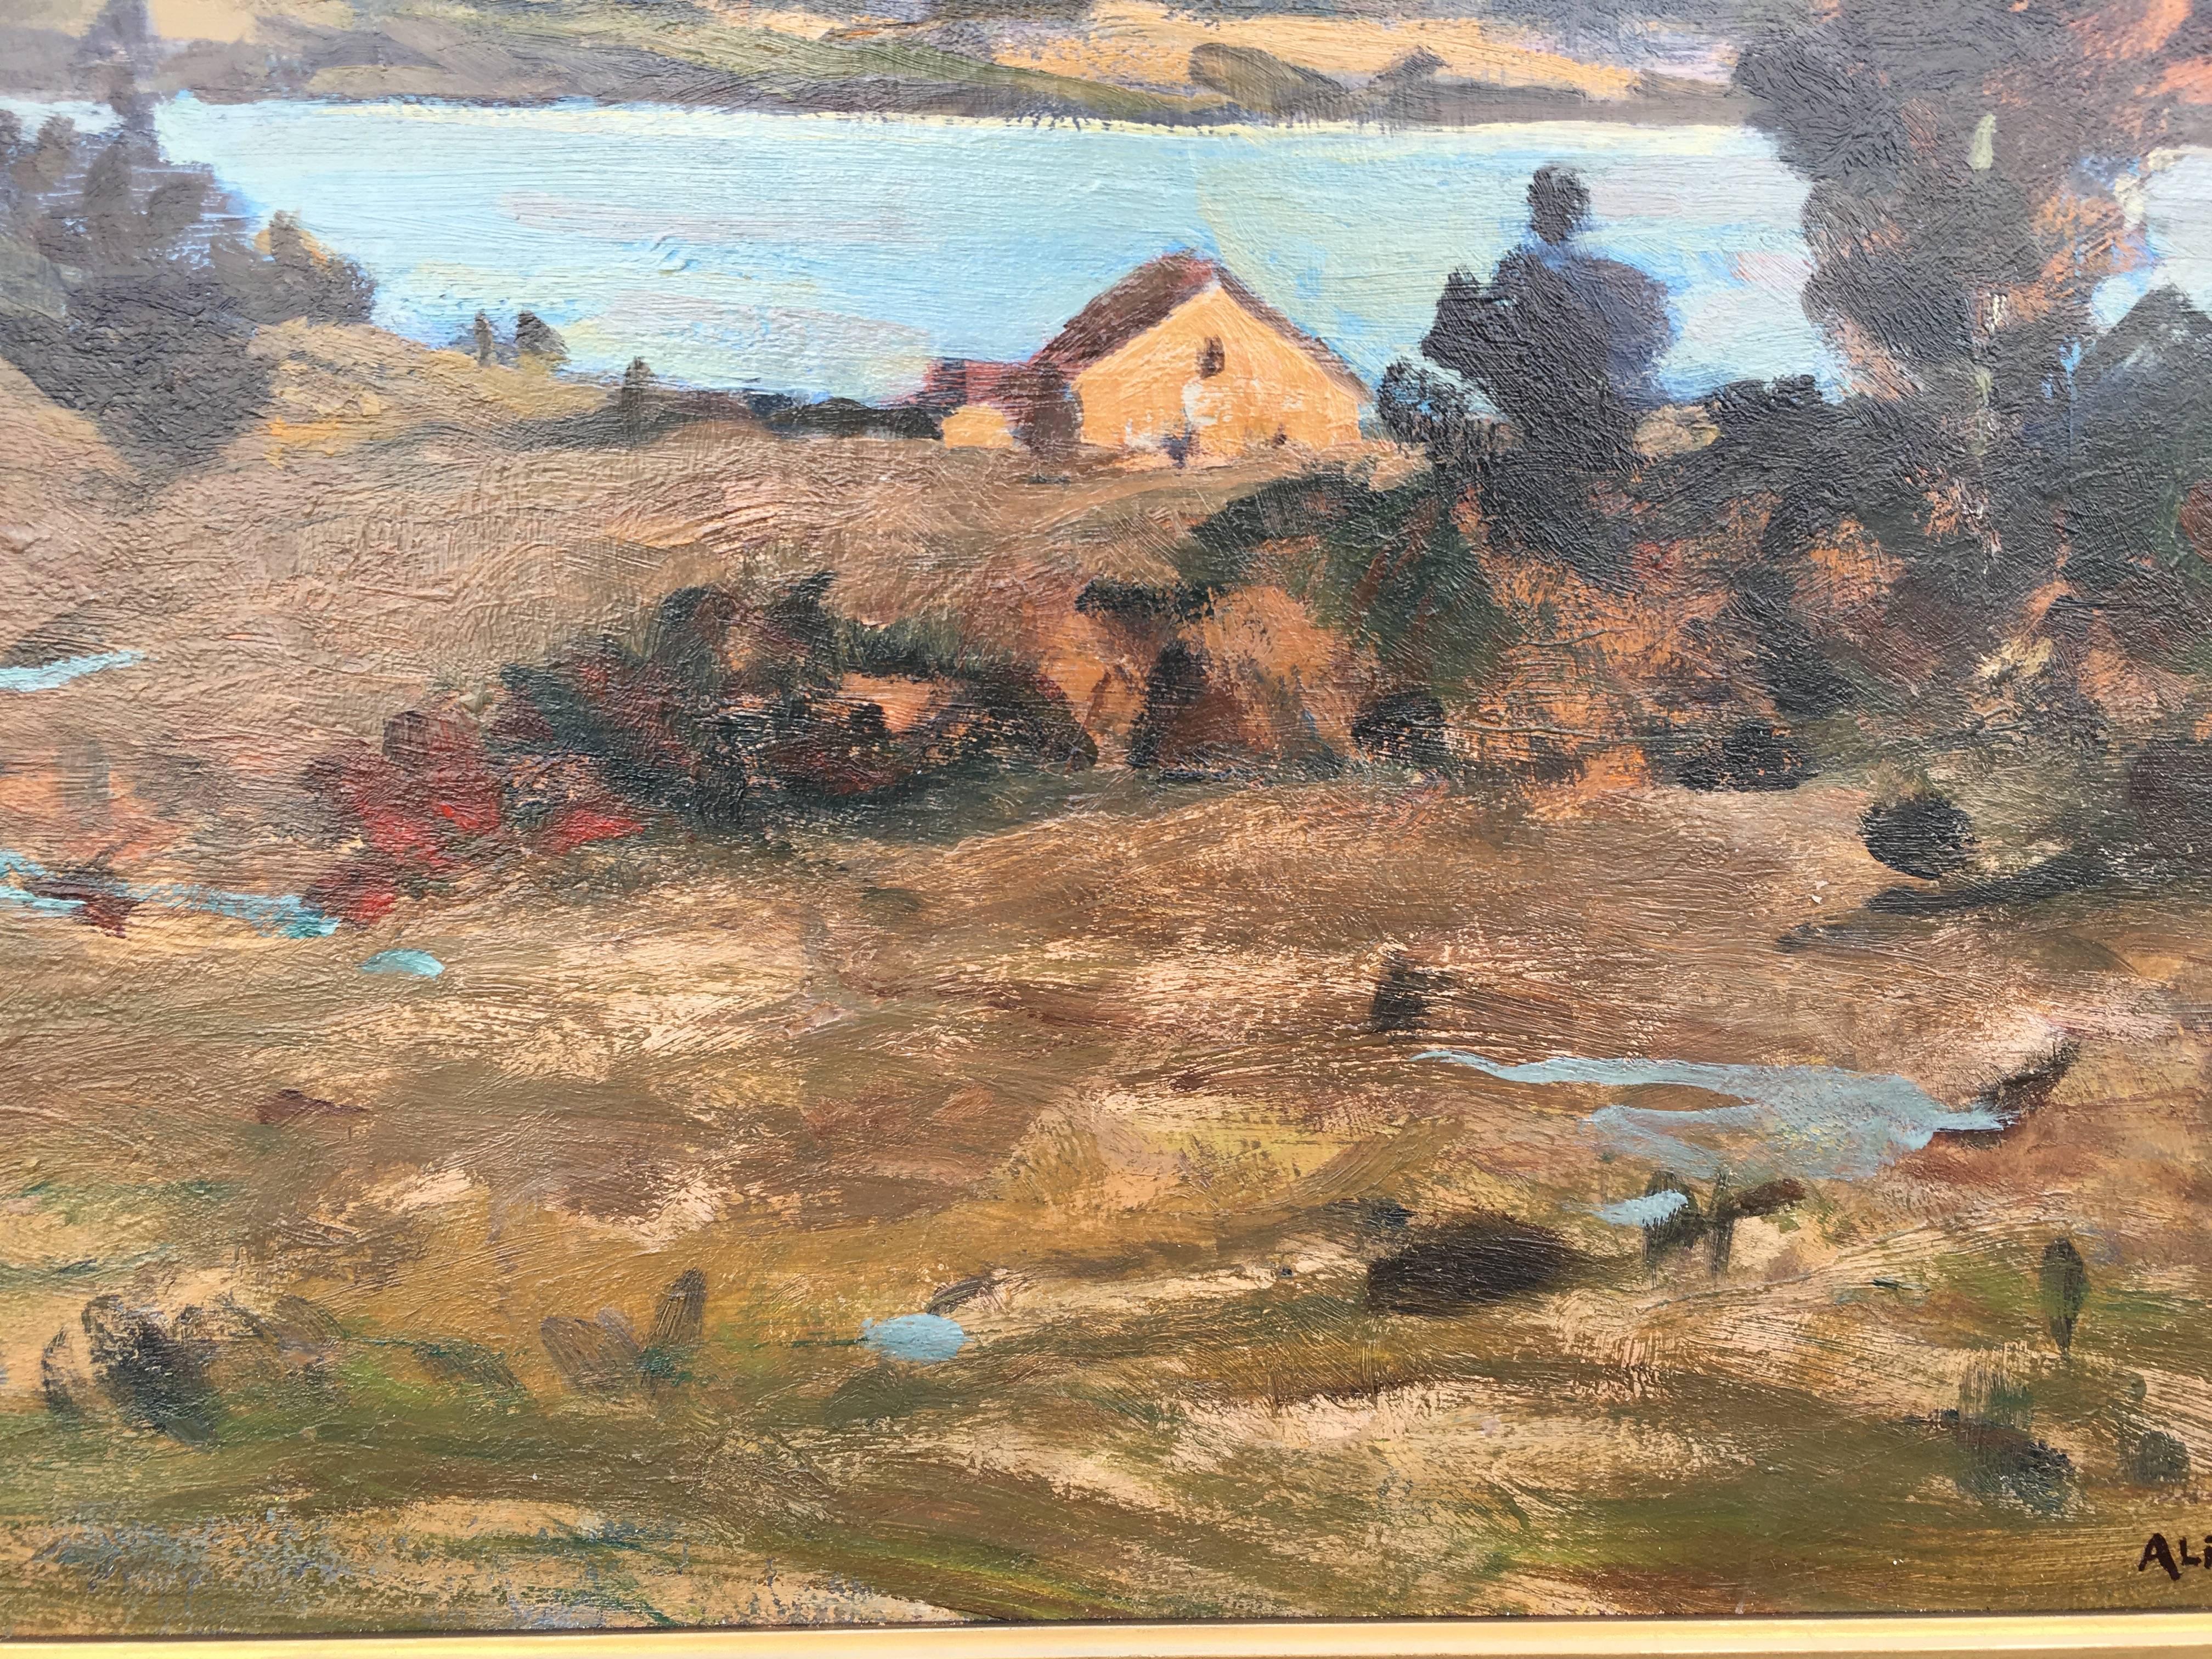 Bass Lake, Merced County, California - Painting by Alexander Bower